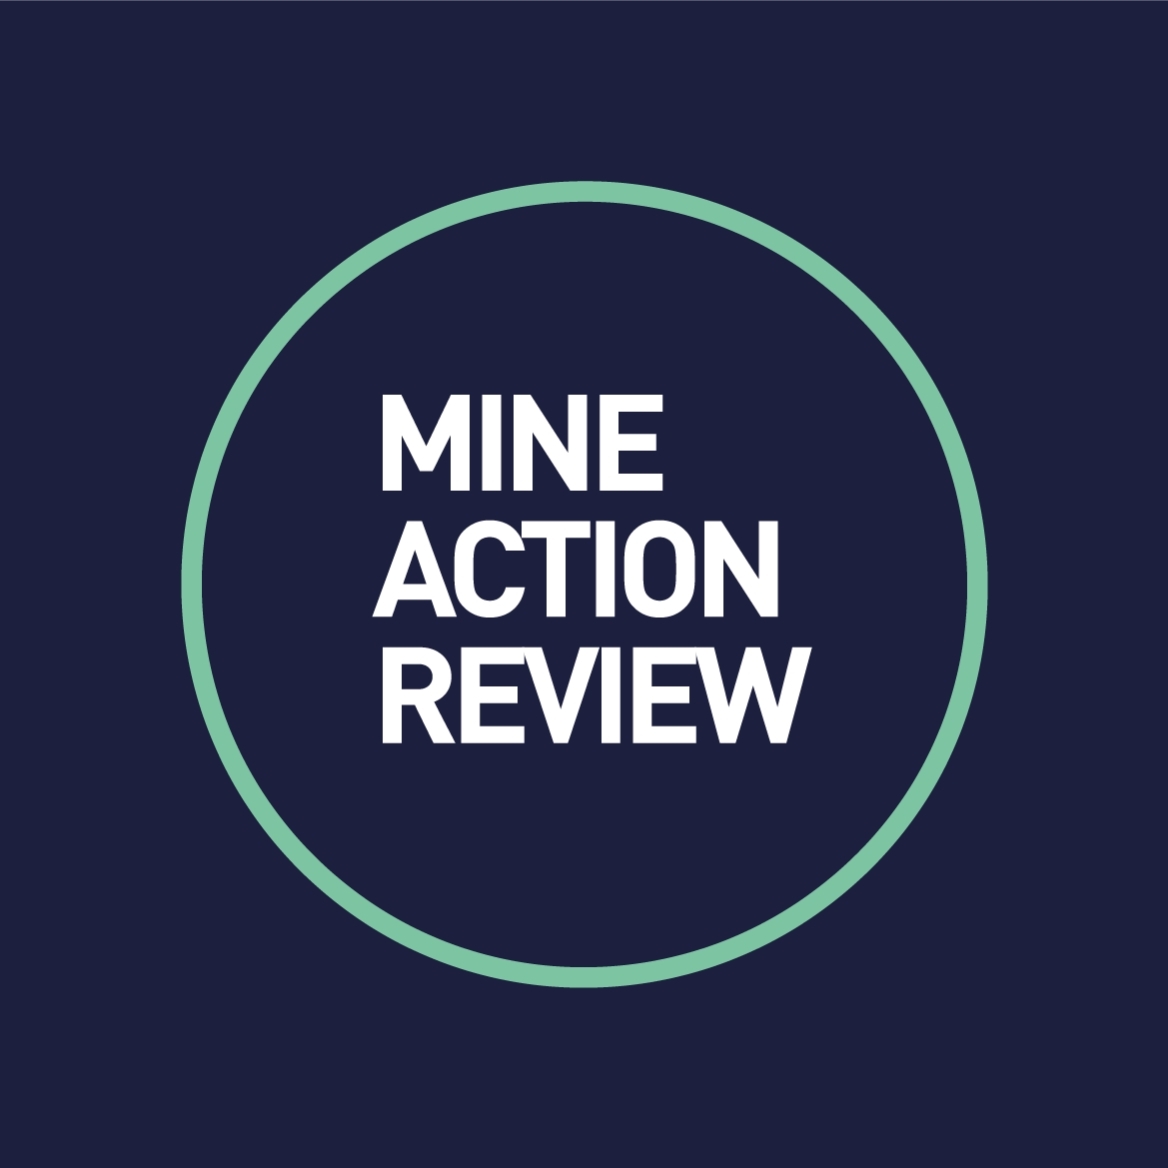 Mine Action Review Logo